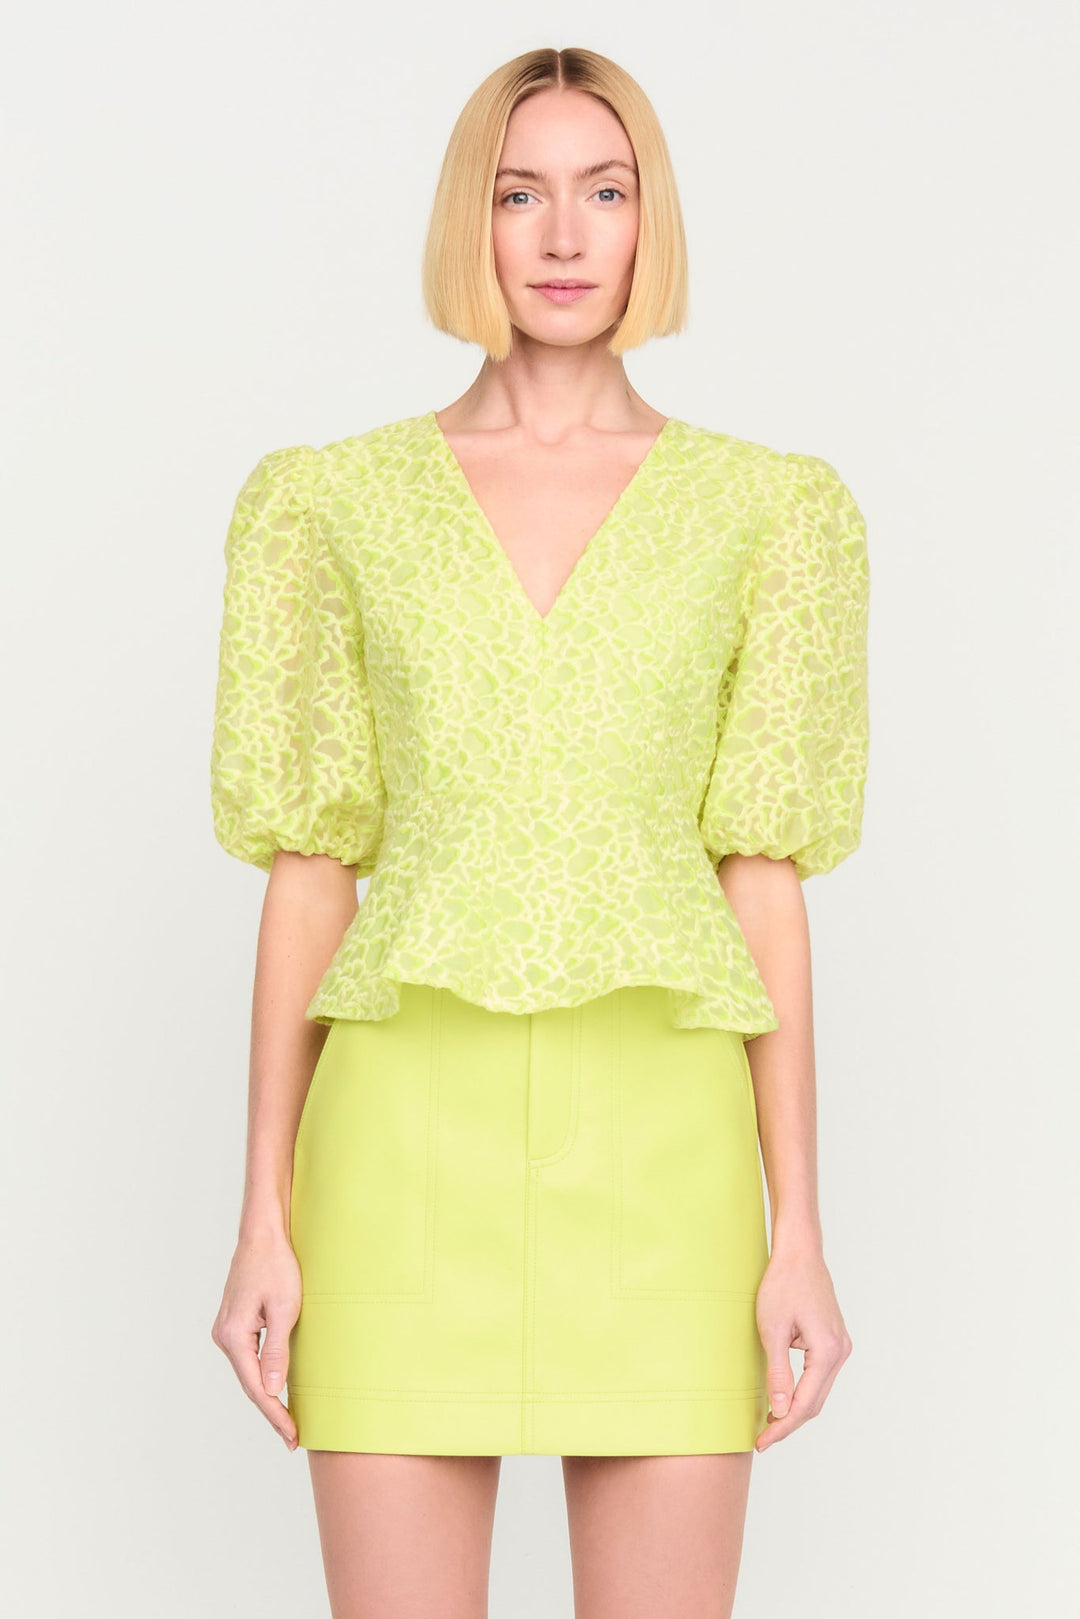 Marie Oliver - Everly Top: Sundew - Shorely Chic Boutique